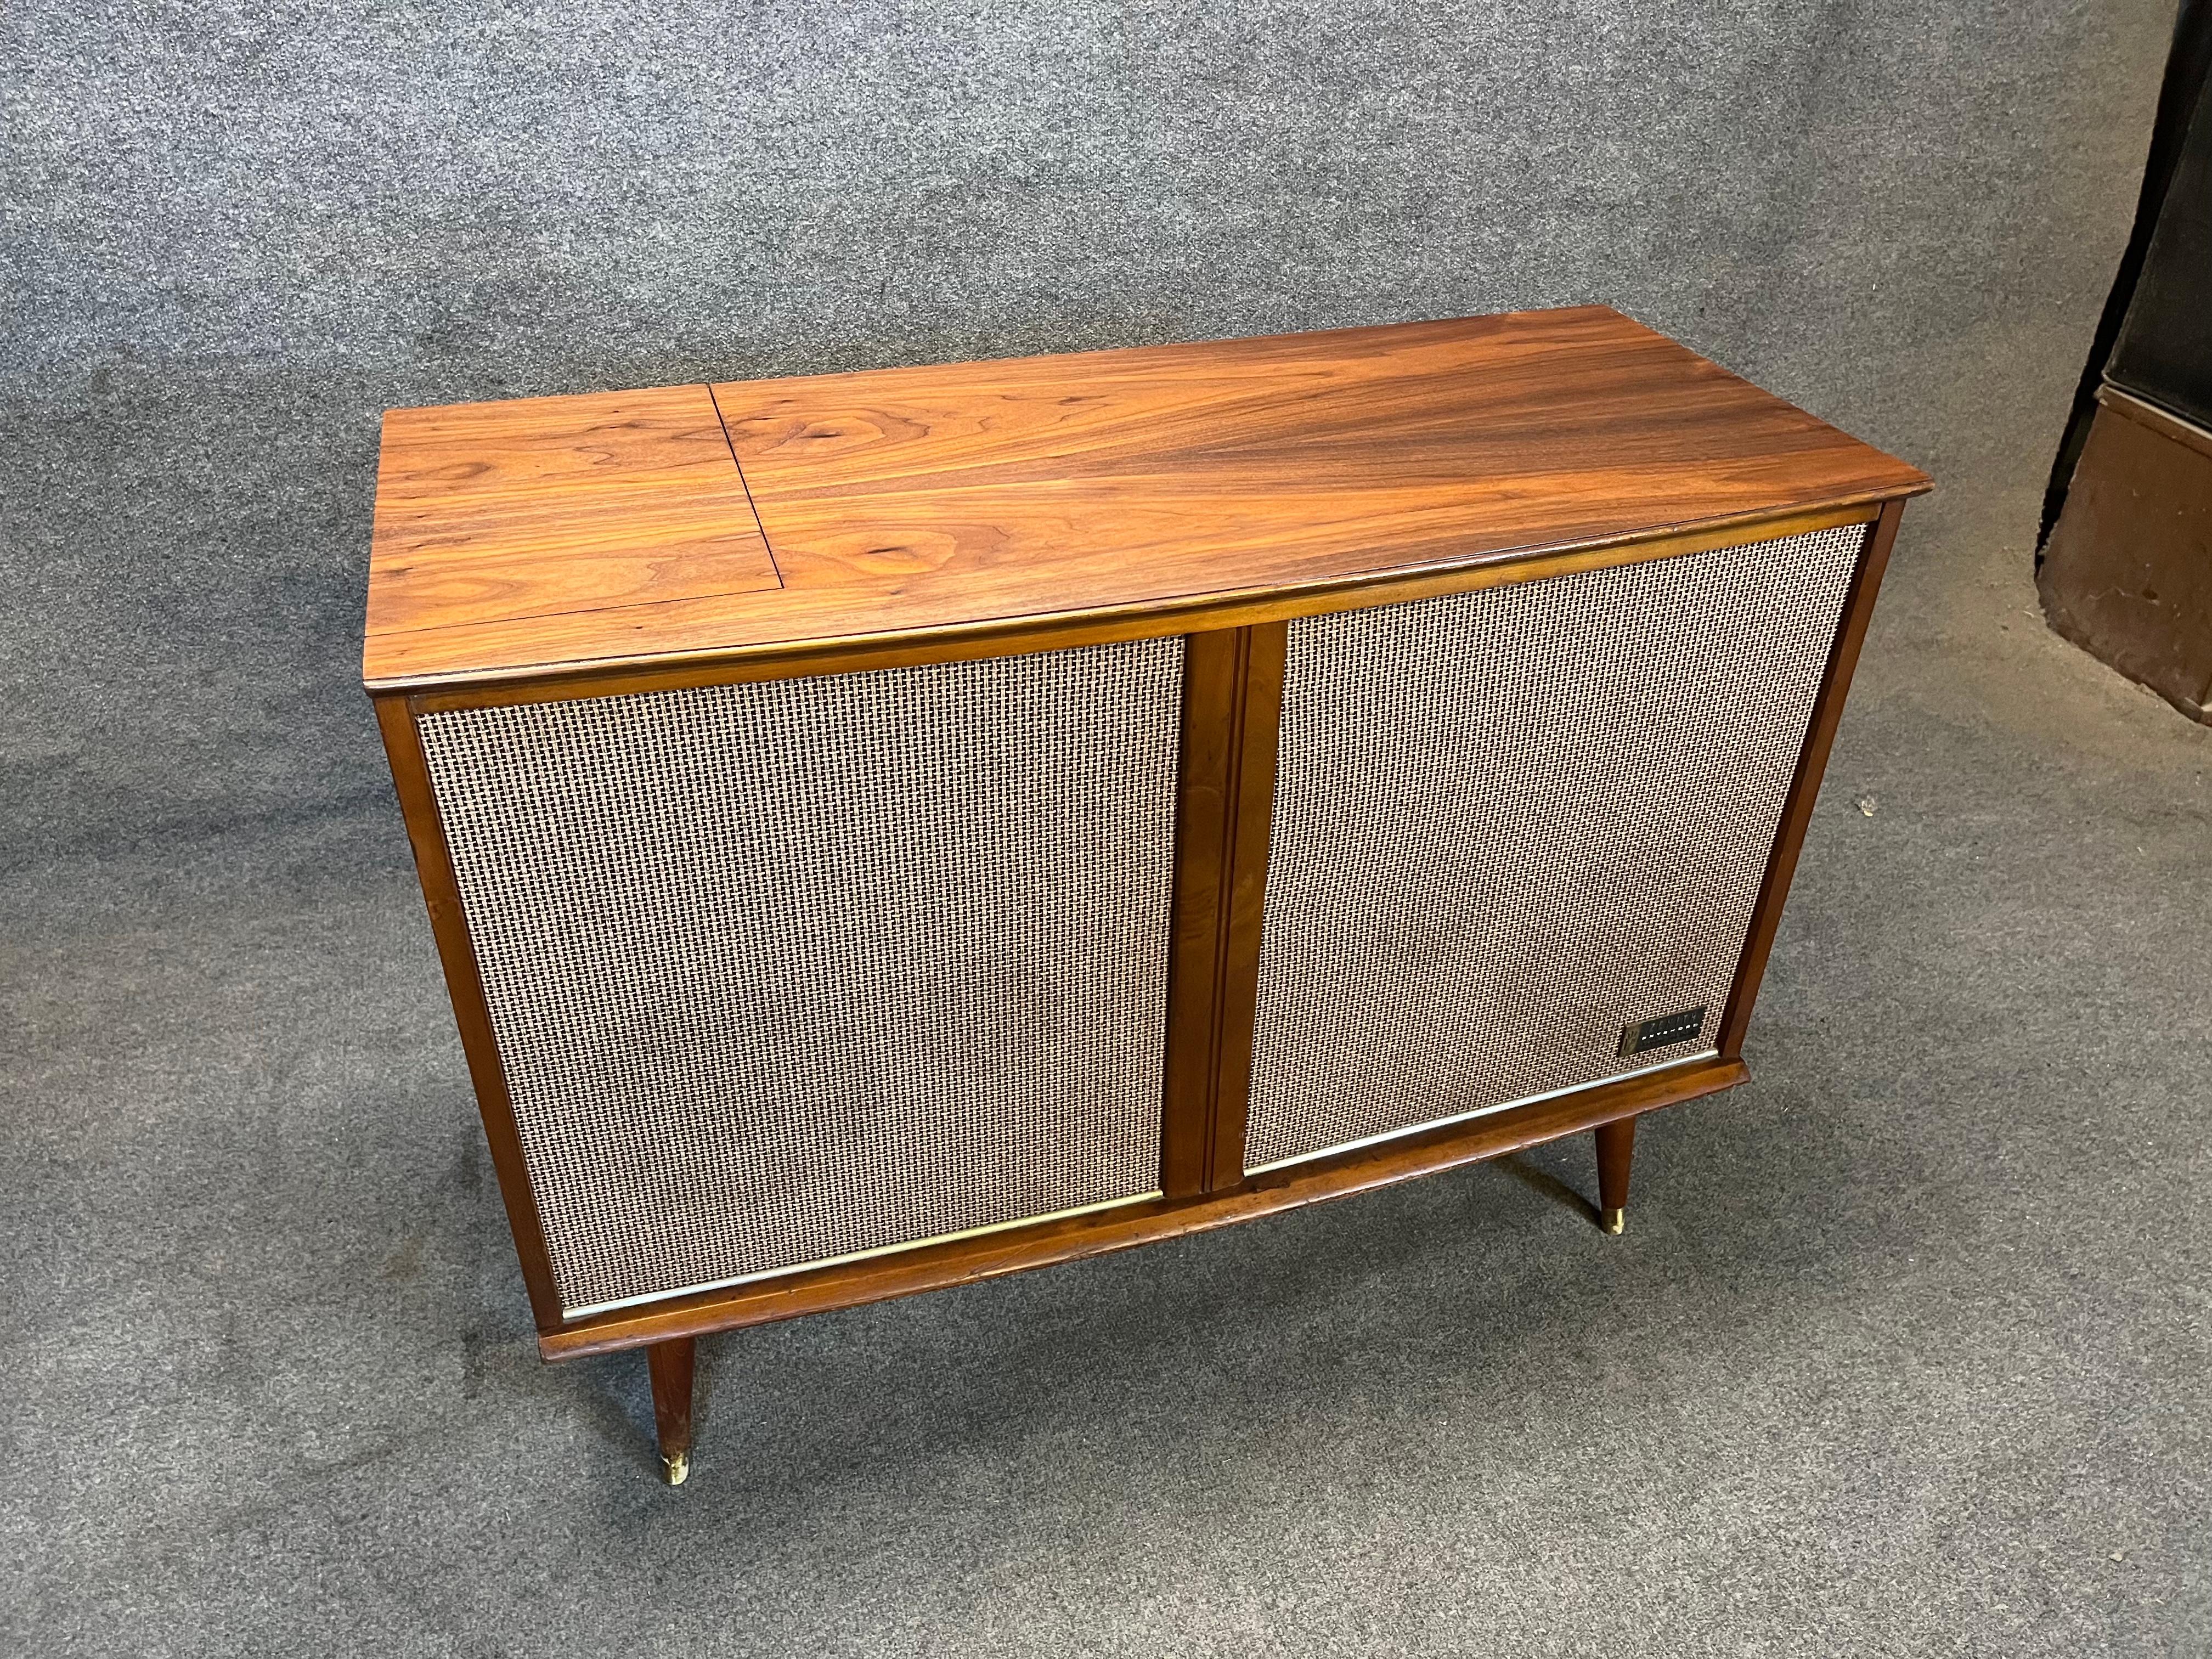 1962 zenith record player and stereo